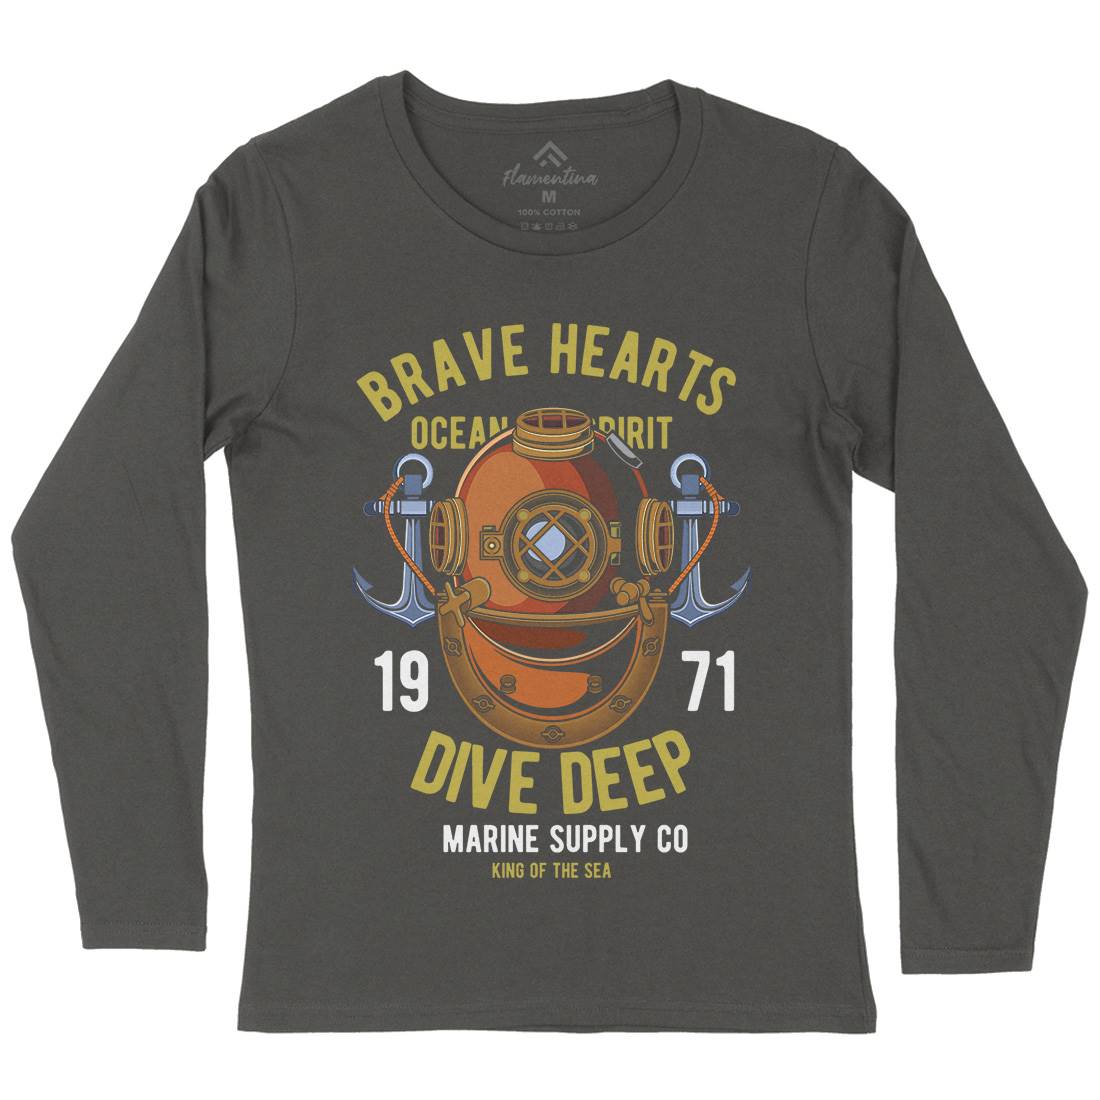 Brave Hearts Diver Womens Long Sleeve T-Shirt Navy C324